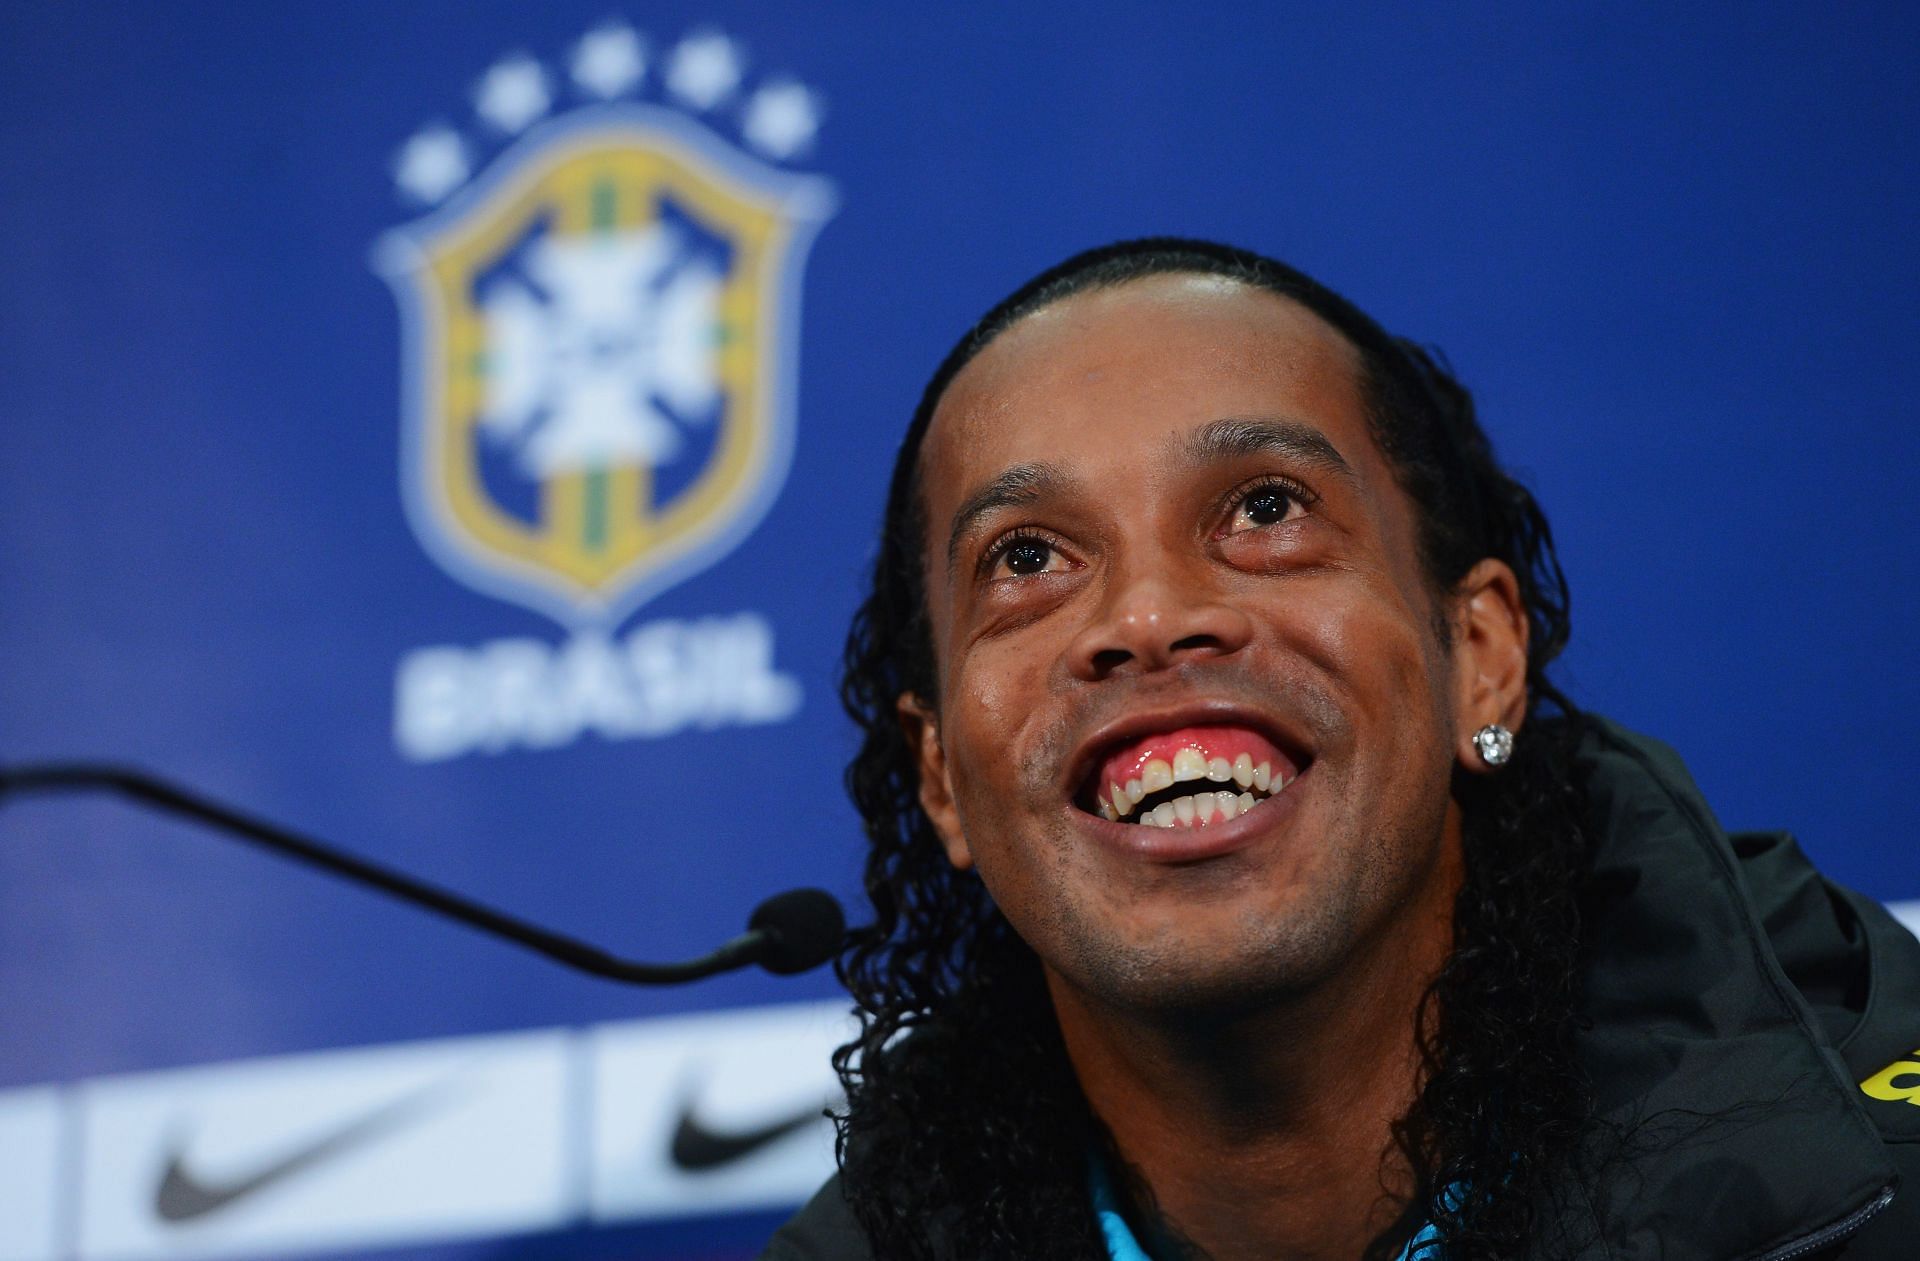 Ronaldinho was also a gifted player who could not sustain his high level.